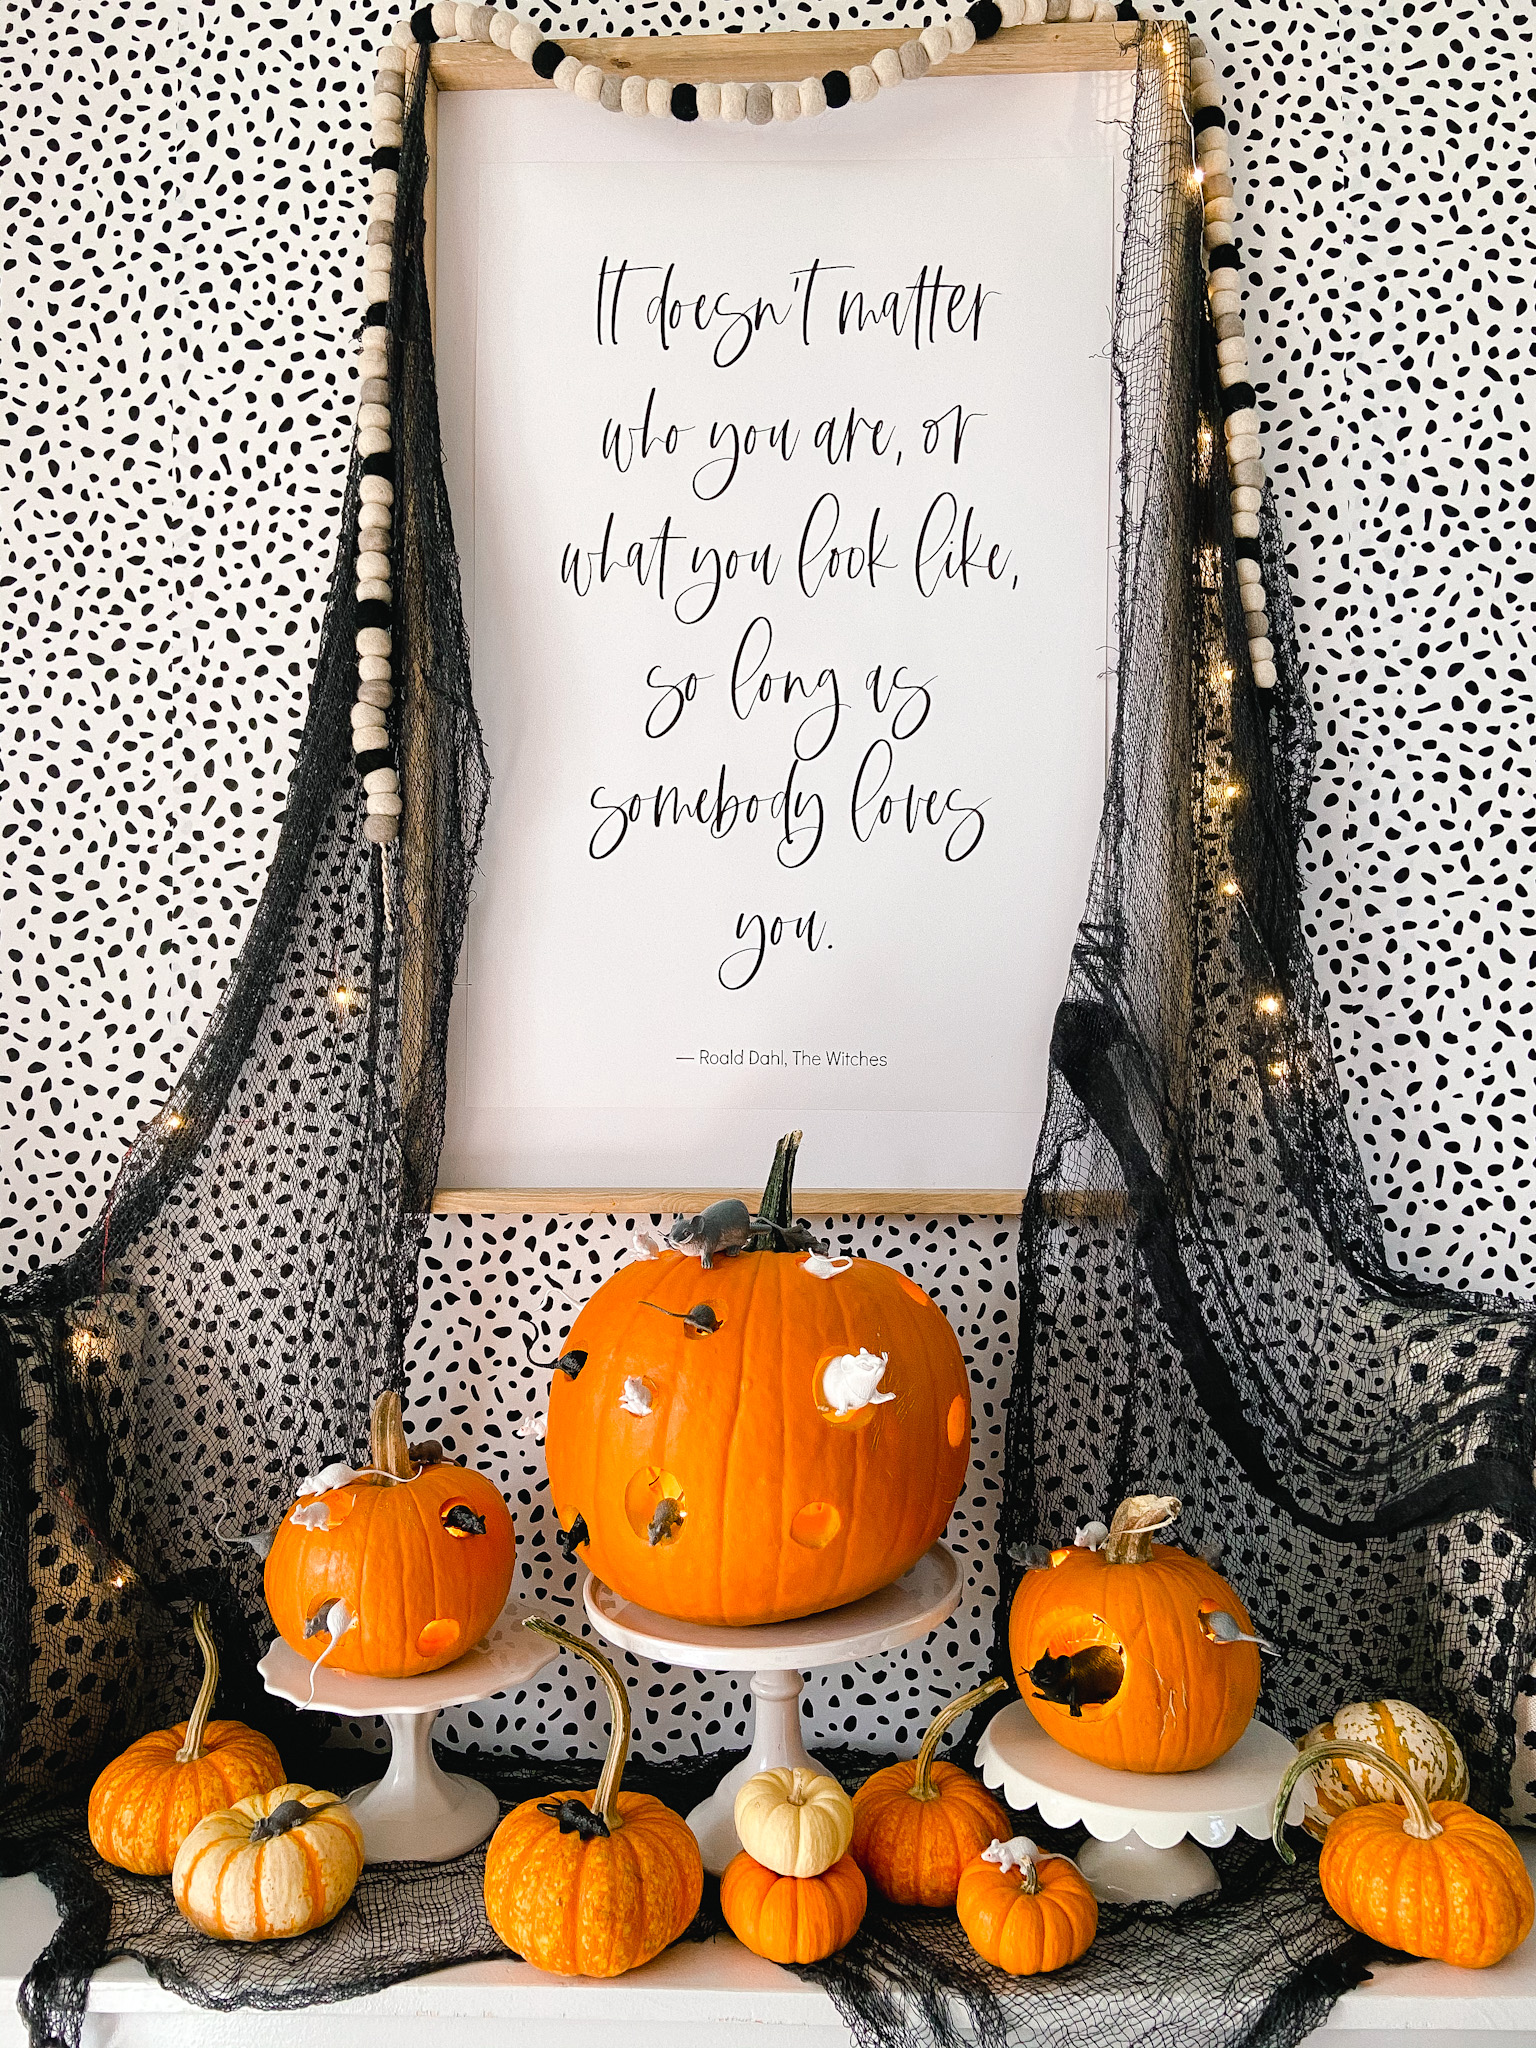 DIY The Witches Mice Pumpkins and Free Printable! Celebrate the new Ronald Dahl movie - The Witches by making Mice Pumpkins and printing out the inspiring quote from the movie. 